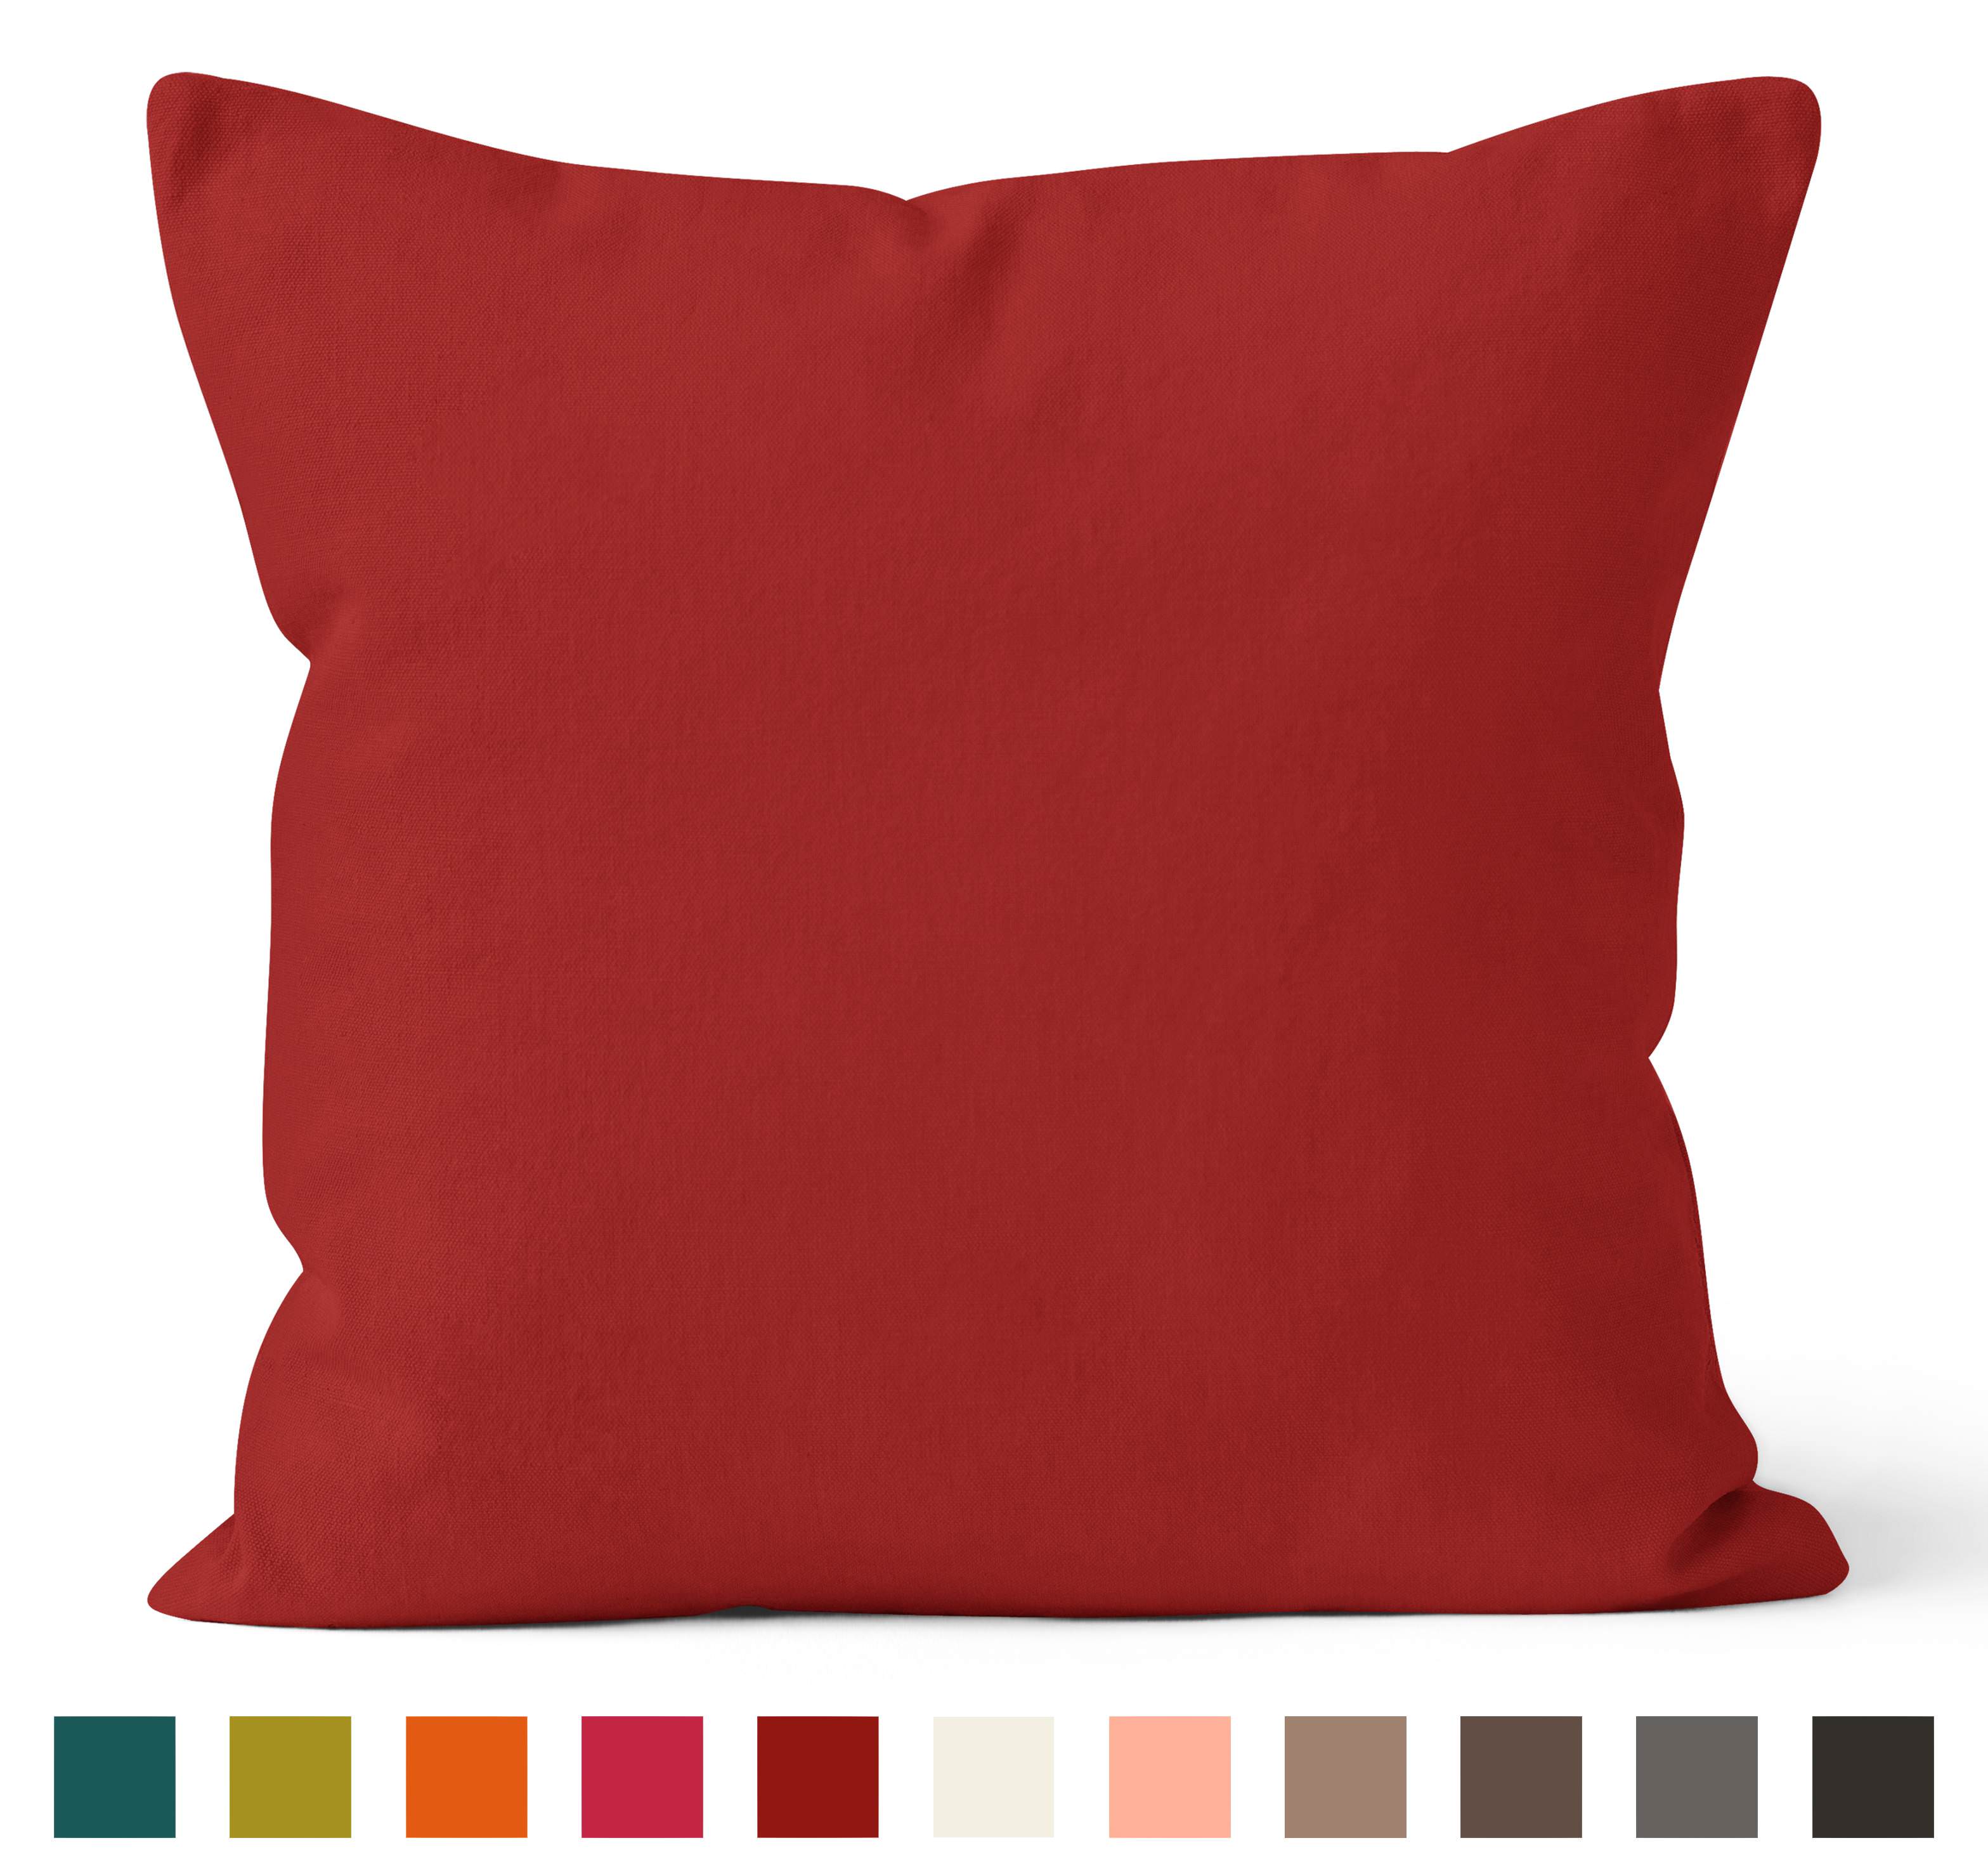 Encasa Homes Dyed Cotton Canvas Cushion Cover (Choose with or without fillers) - 40x40 cm, Deep Red